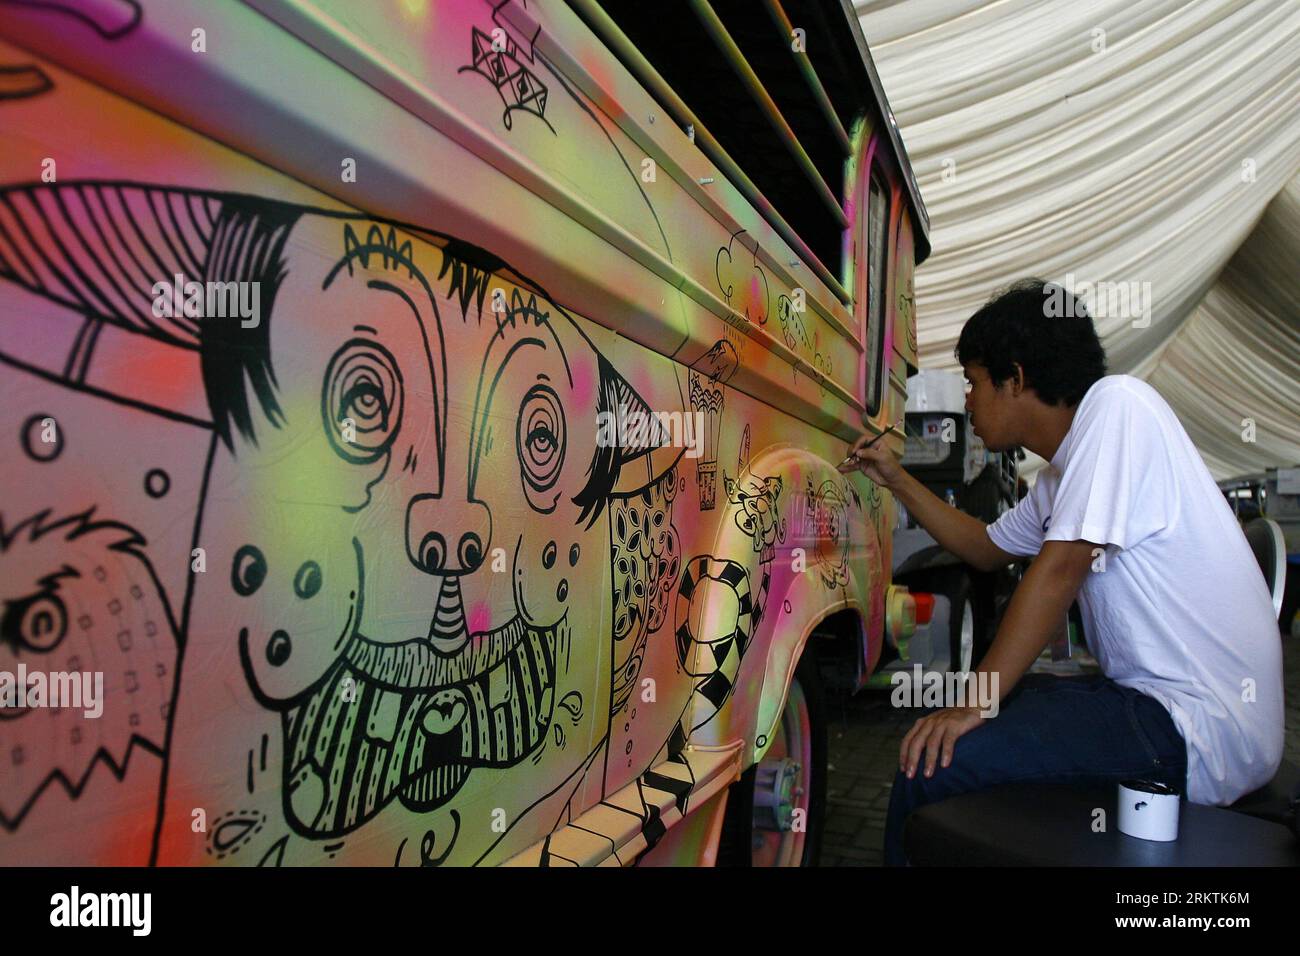 Bildnummer: 58498978  Datum: 21.09.2012  Copyright: imago/Xinhua (120921) -- MANILA, Sept. 21, 2012 (Xinhua) -- An artist paints a jeepney during the Jeepney Arts Festival in Pasay City, the Philippines, Sept. 21, 2012. Jeepney Arts Festival, a three-day festival for the jeepney, the primary mode of transportation in the Philippines, aims to revive the lost art of jeepney as not just a cultural icon, but also a vessel to boost the Philippine tourism. (Xinhua/Rouelle Umali)(dzl) PHILIPPINES-PASAY CITY-JEEPNEY ARTS FESTIVAL PUBLICATIONxNOTxINxCHN Kultur Kunst Malerei Jeep Auto xjh x0x 2012 quer Stock Photo